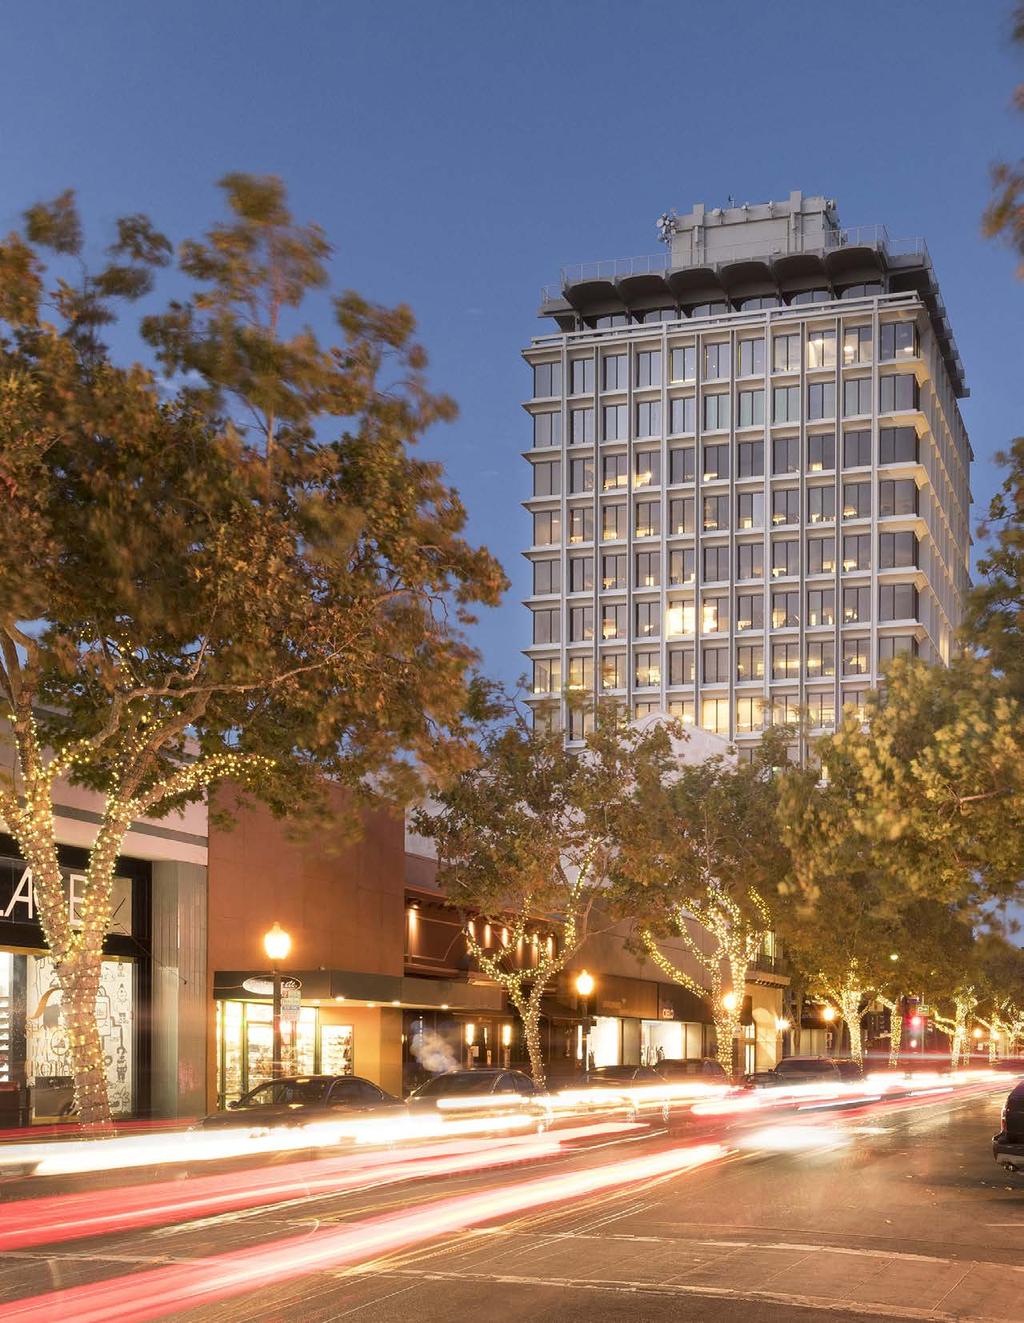 PROMINENCE Upon its completion, 525 University immediately became a symbol of Palo Alto s stature as the region s only high-rise office tower and continues to be one of the